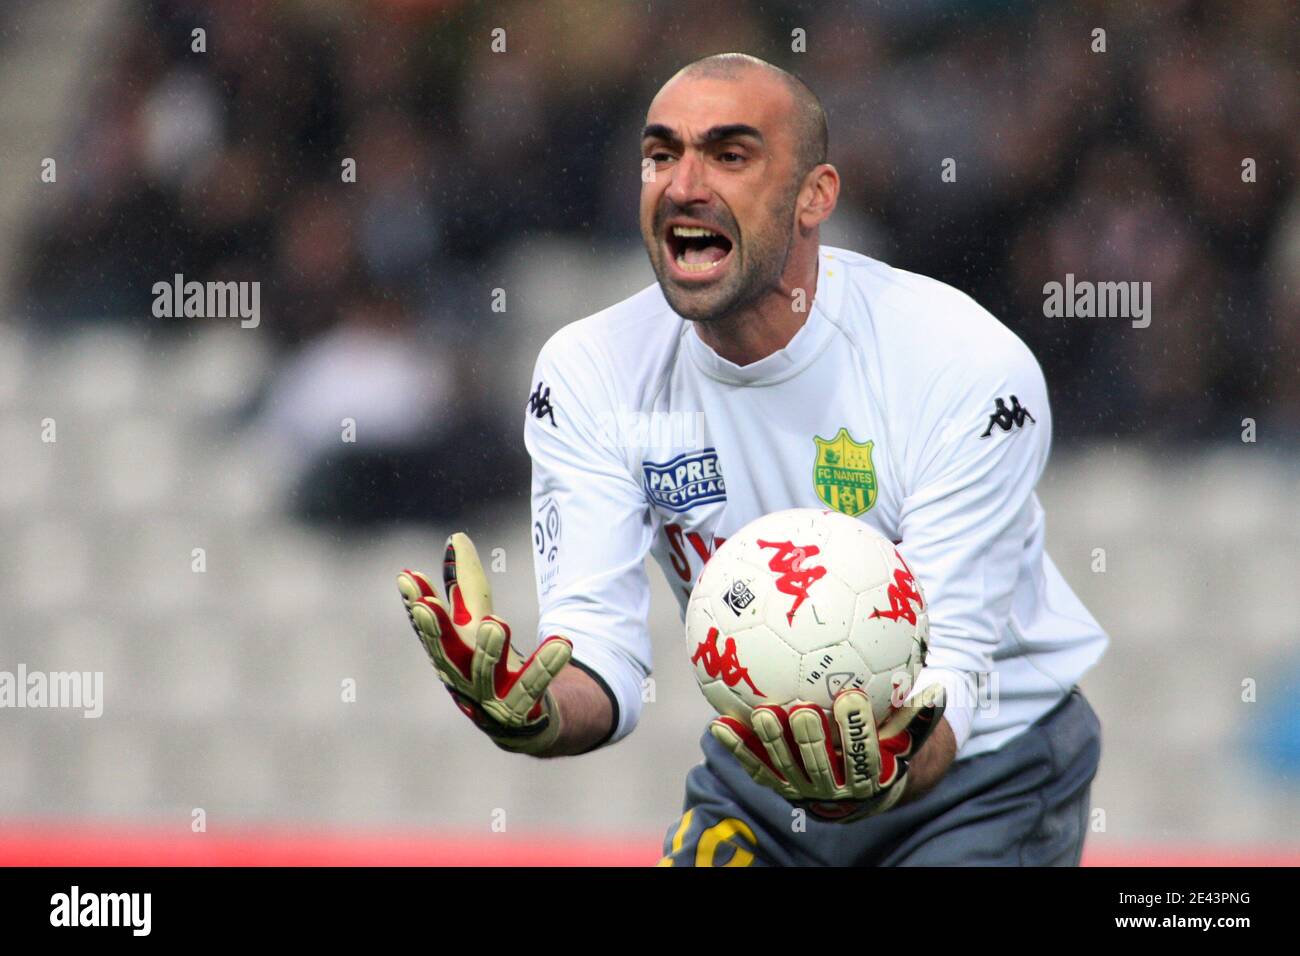 Nantes' goalkeeper Jerome Alonzo during the French First League soccer match, Nantes vs Lille at the Beaujoire stadium in Nantes, France on April 4, 2009. Photo by JP/Tranvouez/Asa Pictures/ABACAPRESS.COM Stock Photo